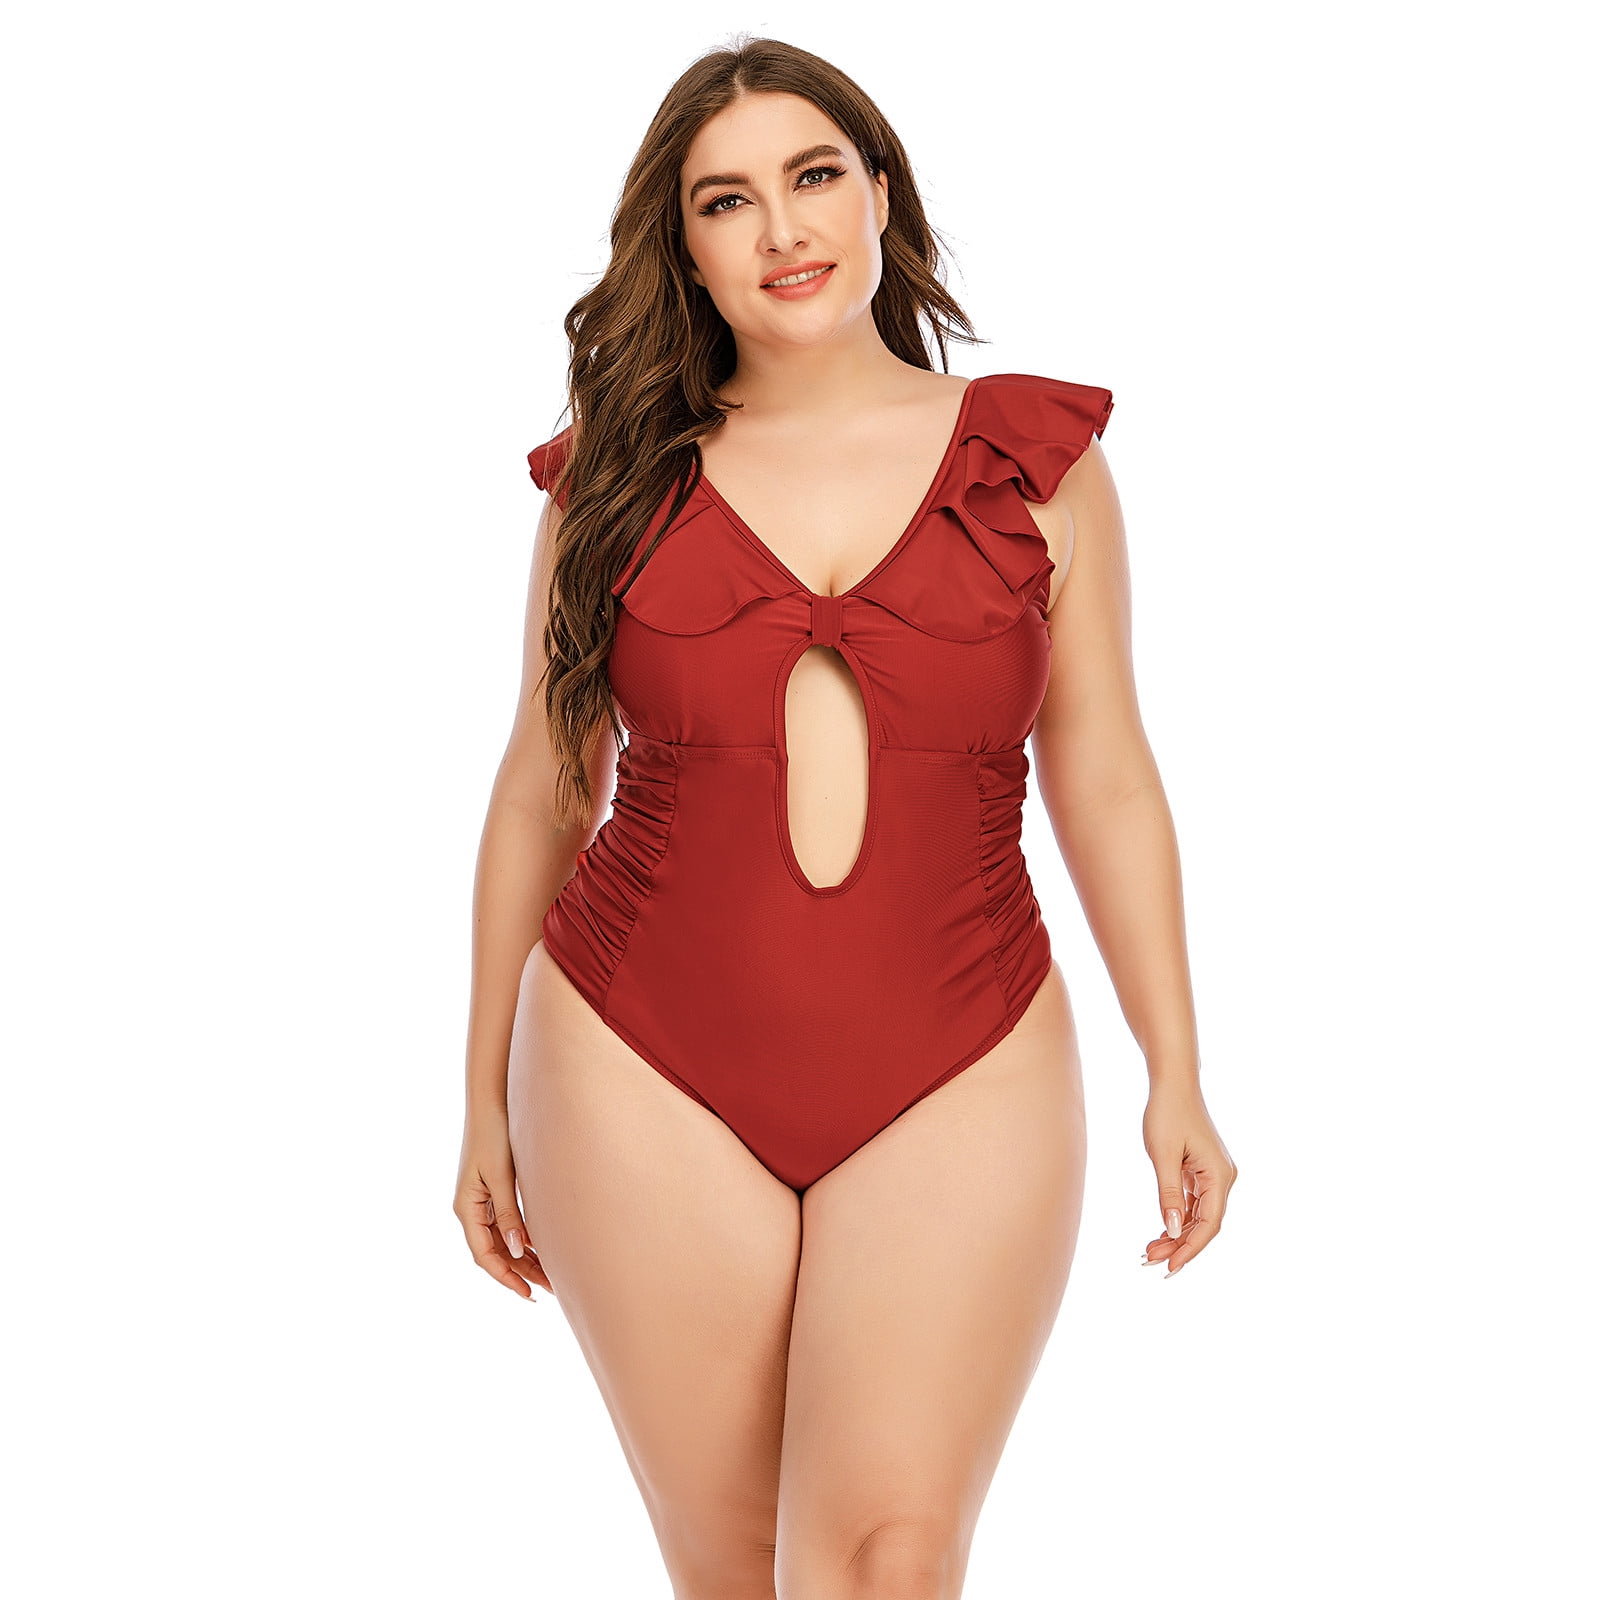 ZQGJB Women's and Women's Plus Ruffled Swimsuit Keyhole Front Hollow Out  One Piece Swimsuit Tummy Control Bathing Suit Beachwear Red,XXL